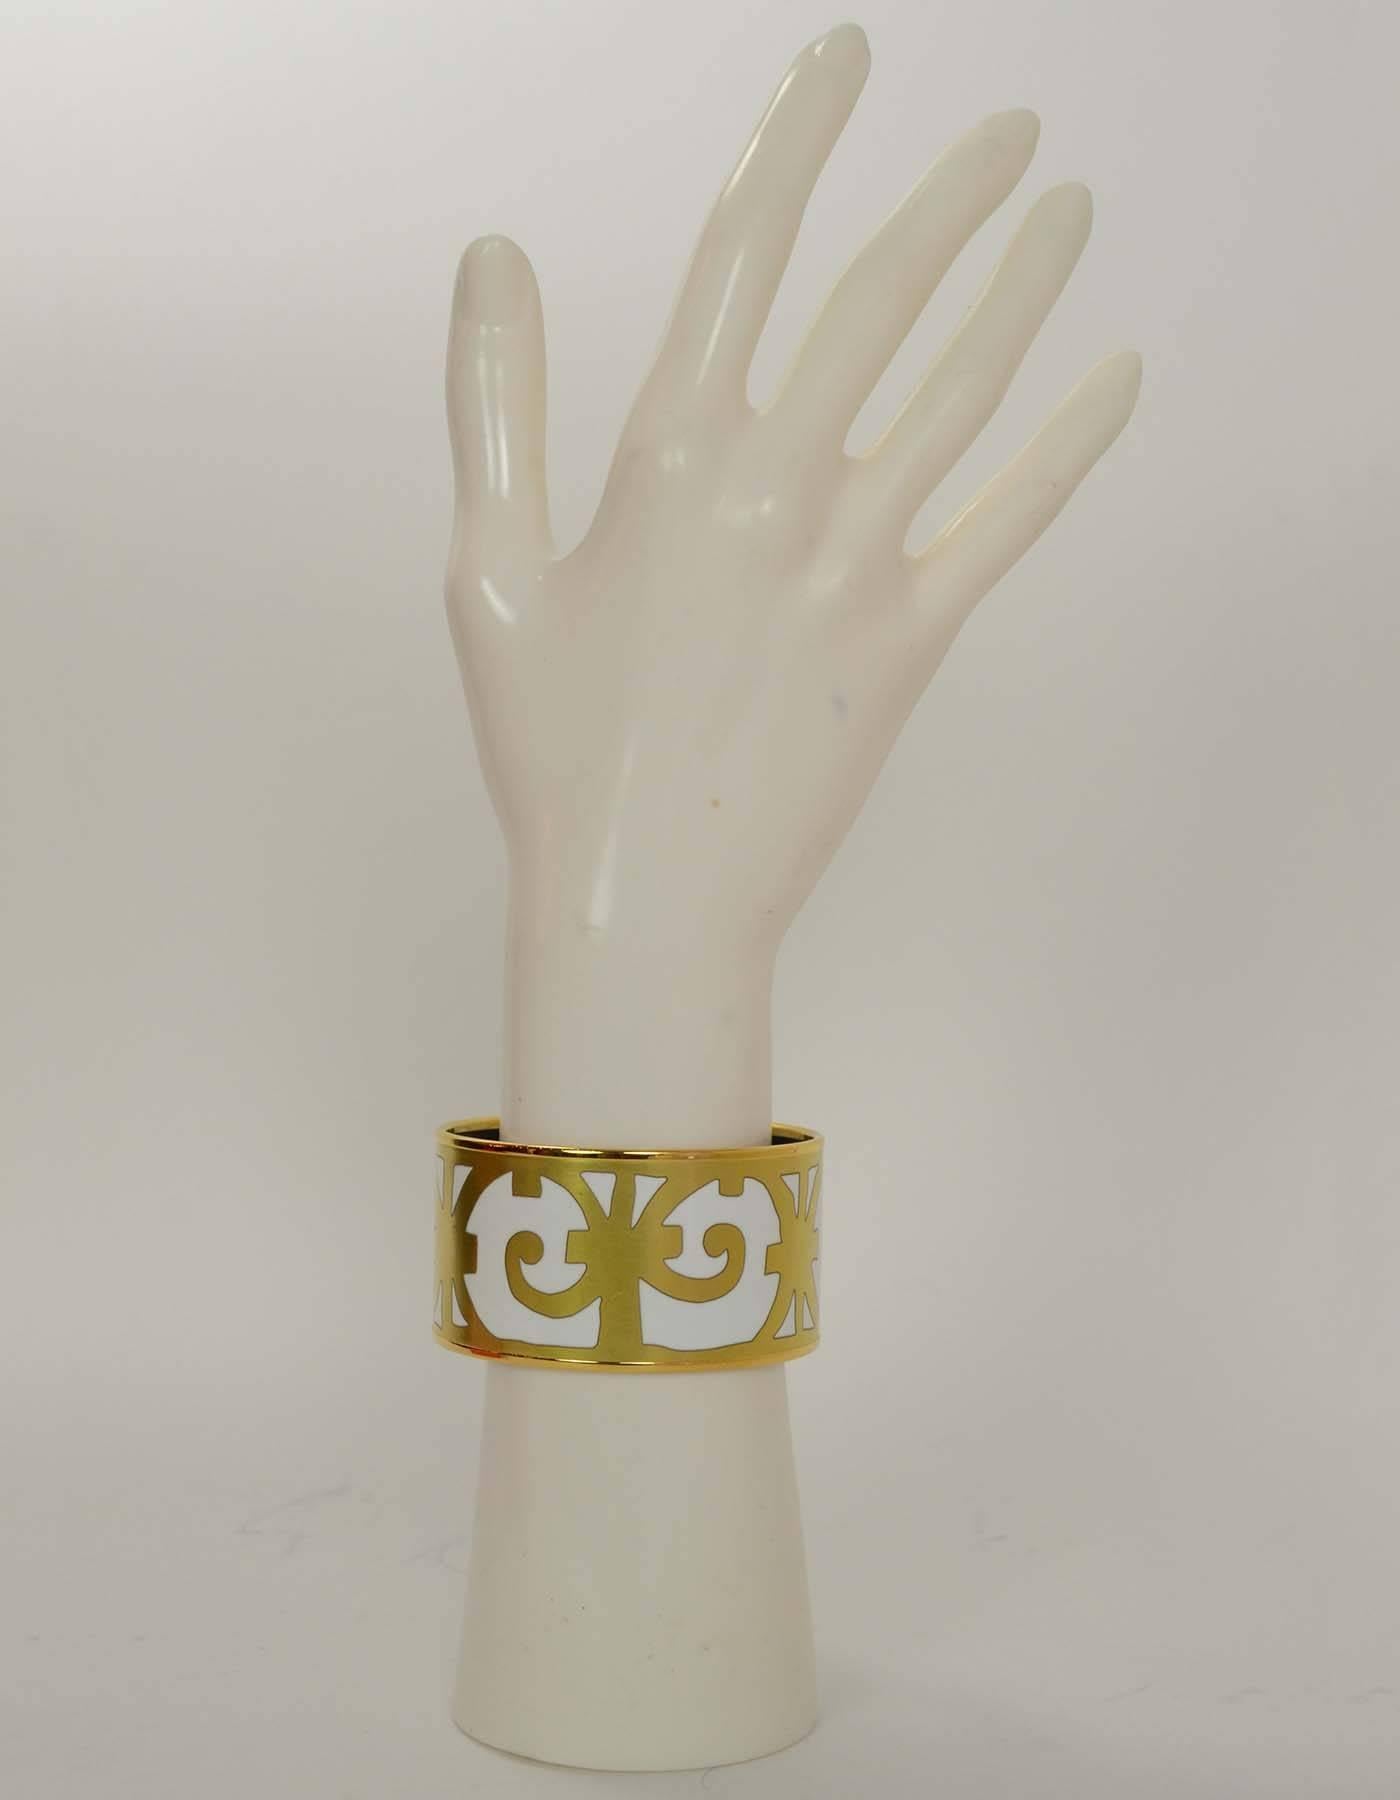 Hermes White & Gold Balcons du Guadalquivir Extra Wide Bracelet Sz 65

Made in: France
Stamp: Made in France + T
Closure: None
Color: White and gold
Retail Price: $700 + tax
Materials: Metal and enamel
Overall Condition: Excellent with the